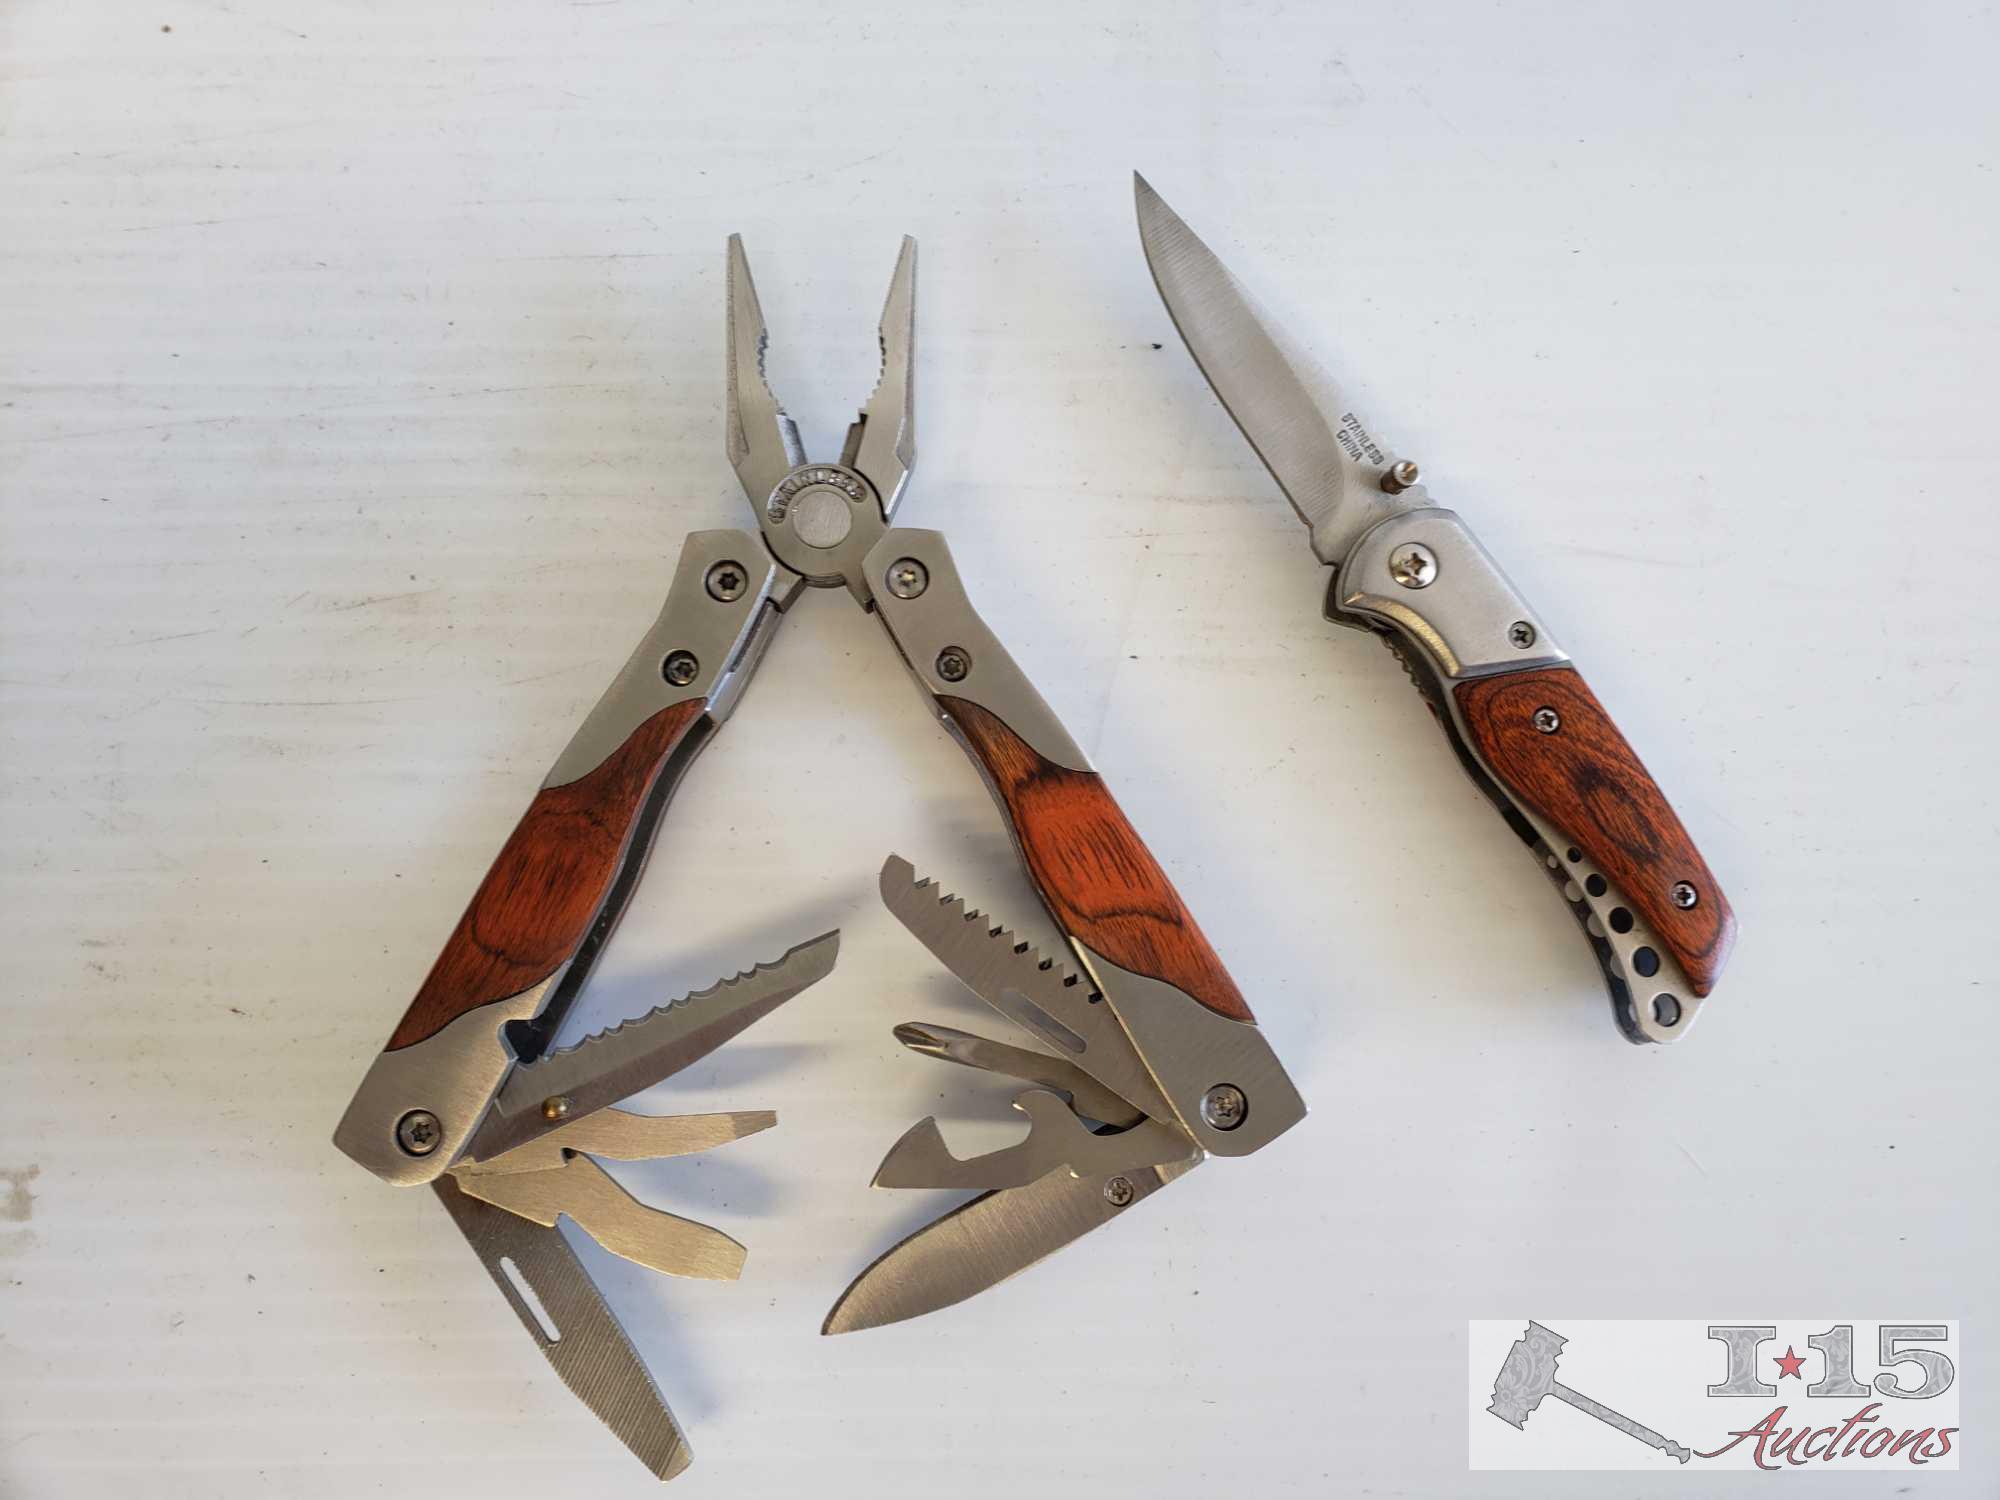 Northern Industrial Multitool and Pocket Knife Set